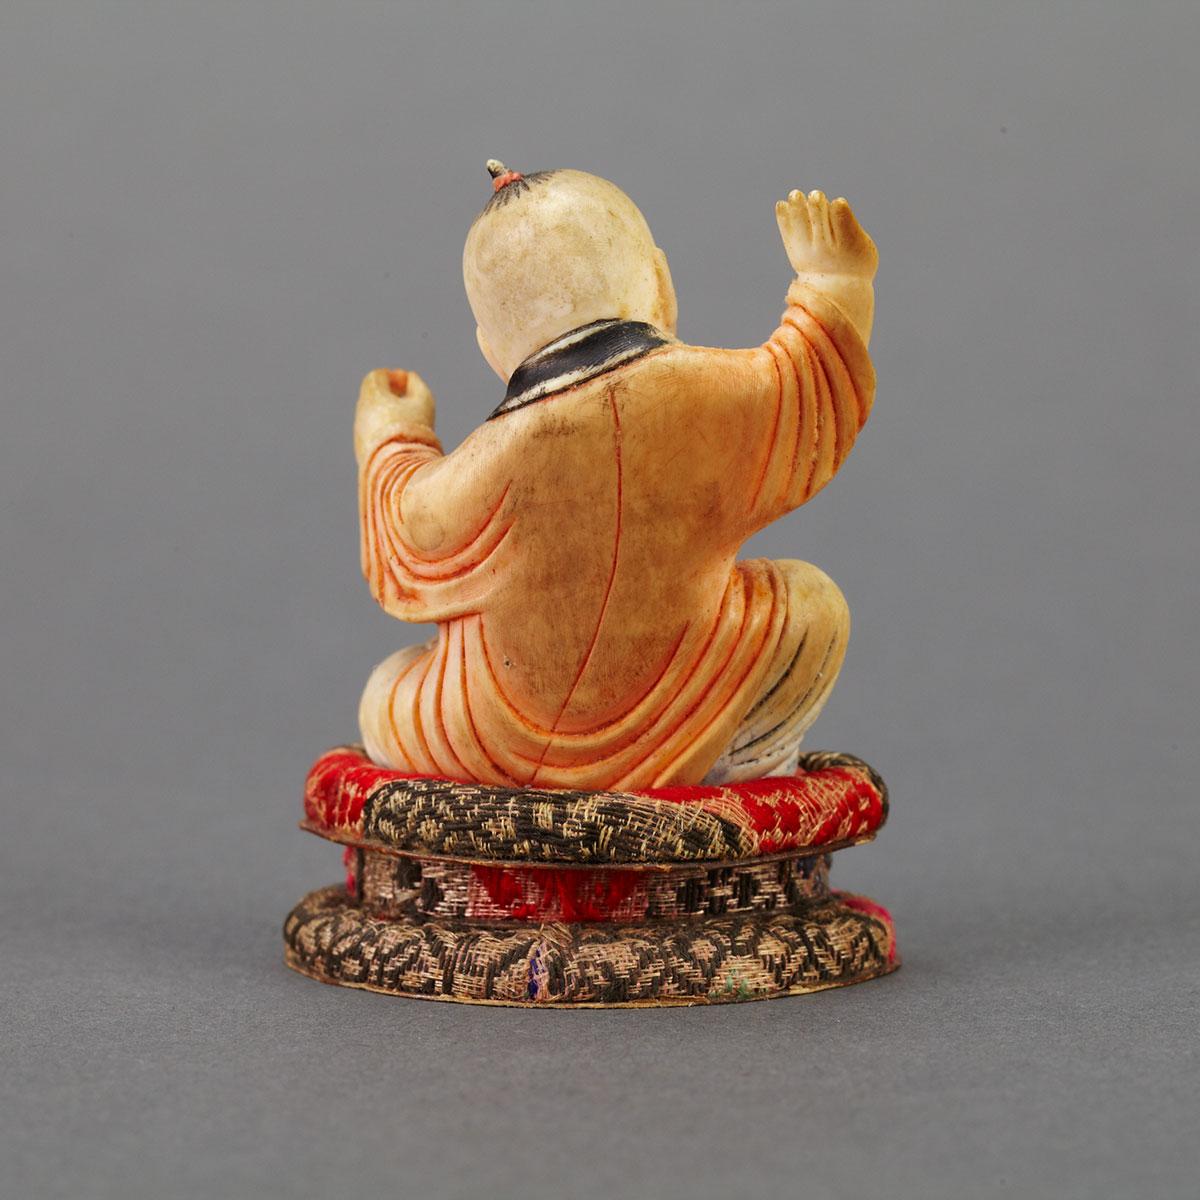 Small Tinted Ivory Figure of a Boy, 19th Century